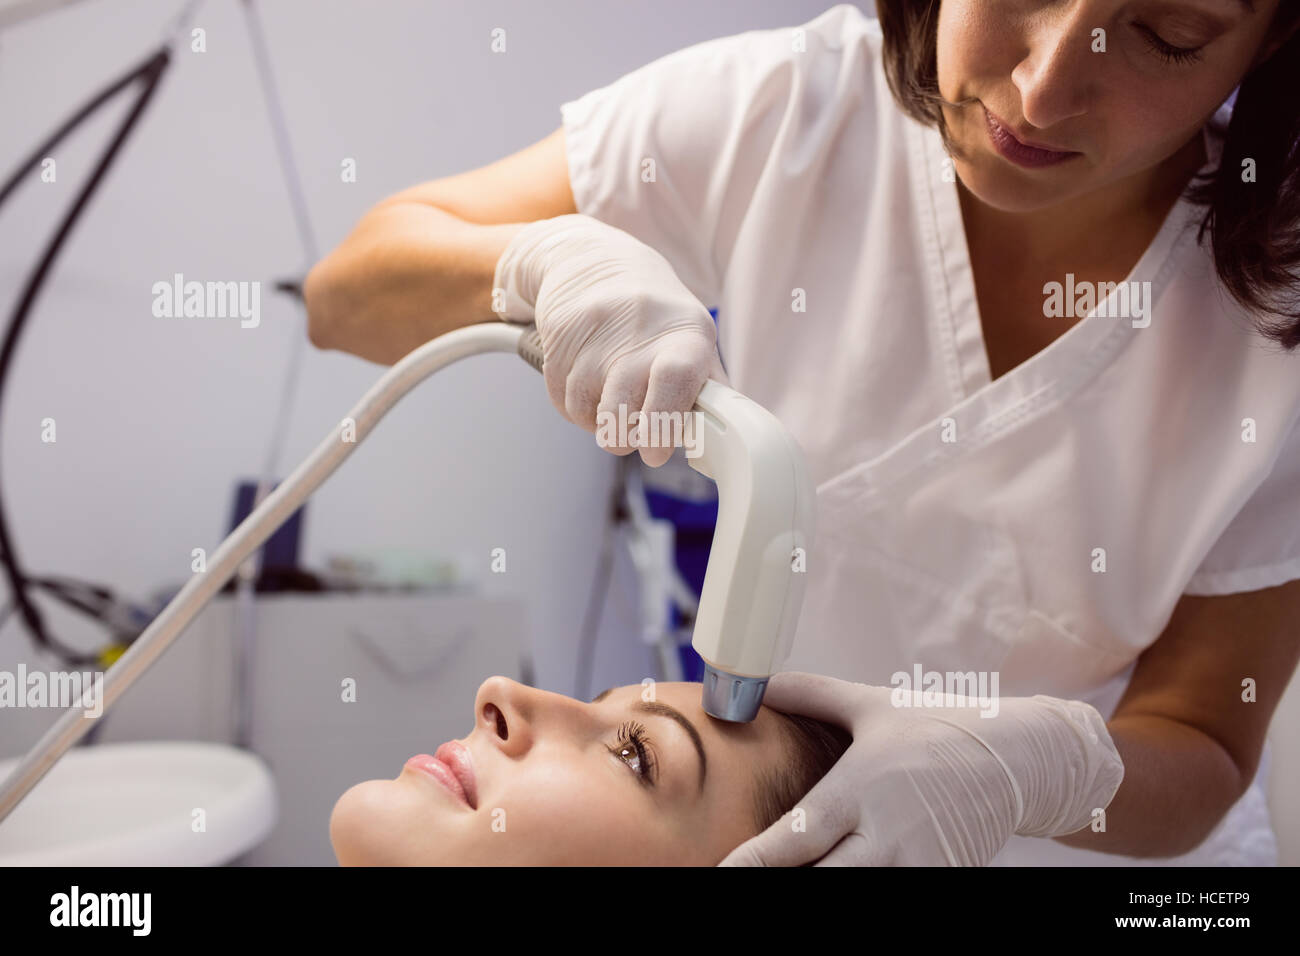 Doctor giving cosmetic treatment to female patient Stock Photo